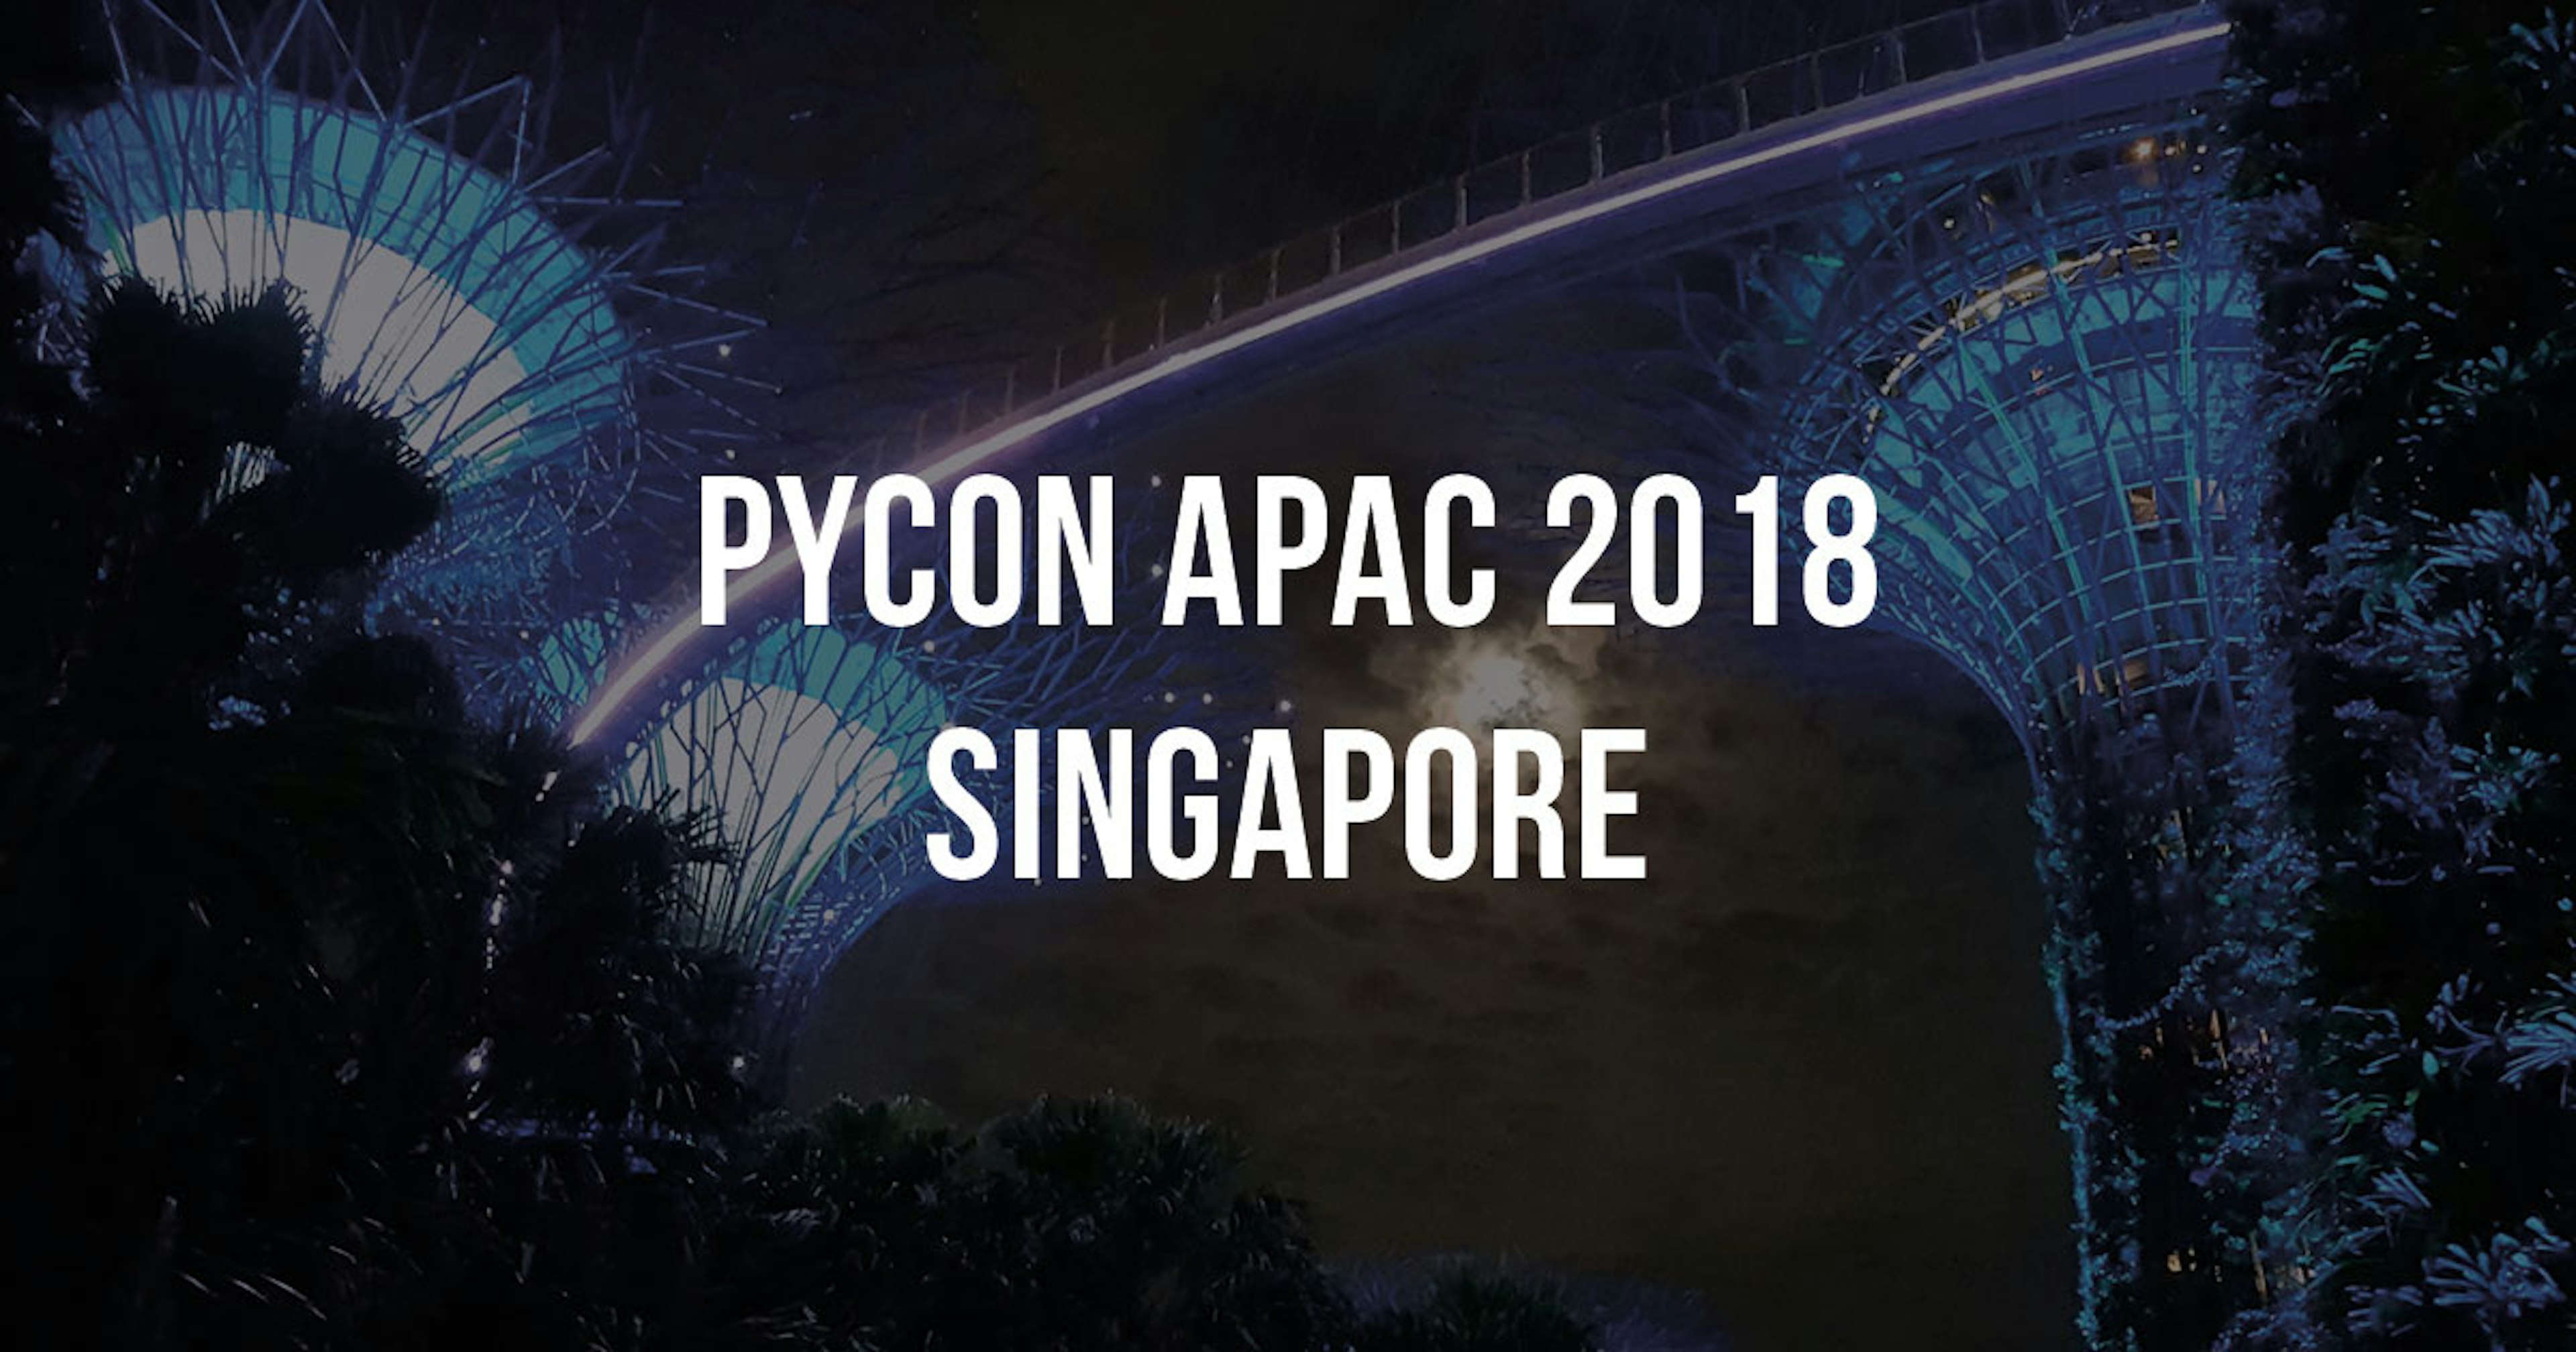 /assets/blog/2018-06-12-my-pycon-apac-2018-experience-in-singapore/2018-06-12-pycon-apac-2018-singapore-experience-0a0c3dc404.jpg